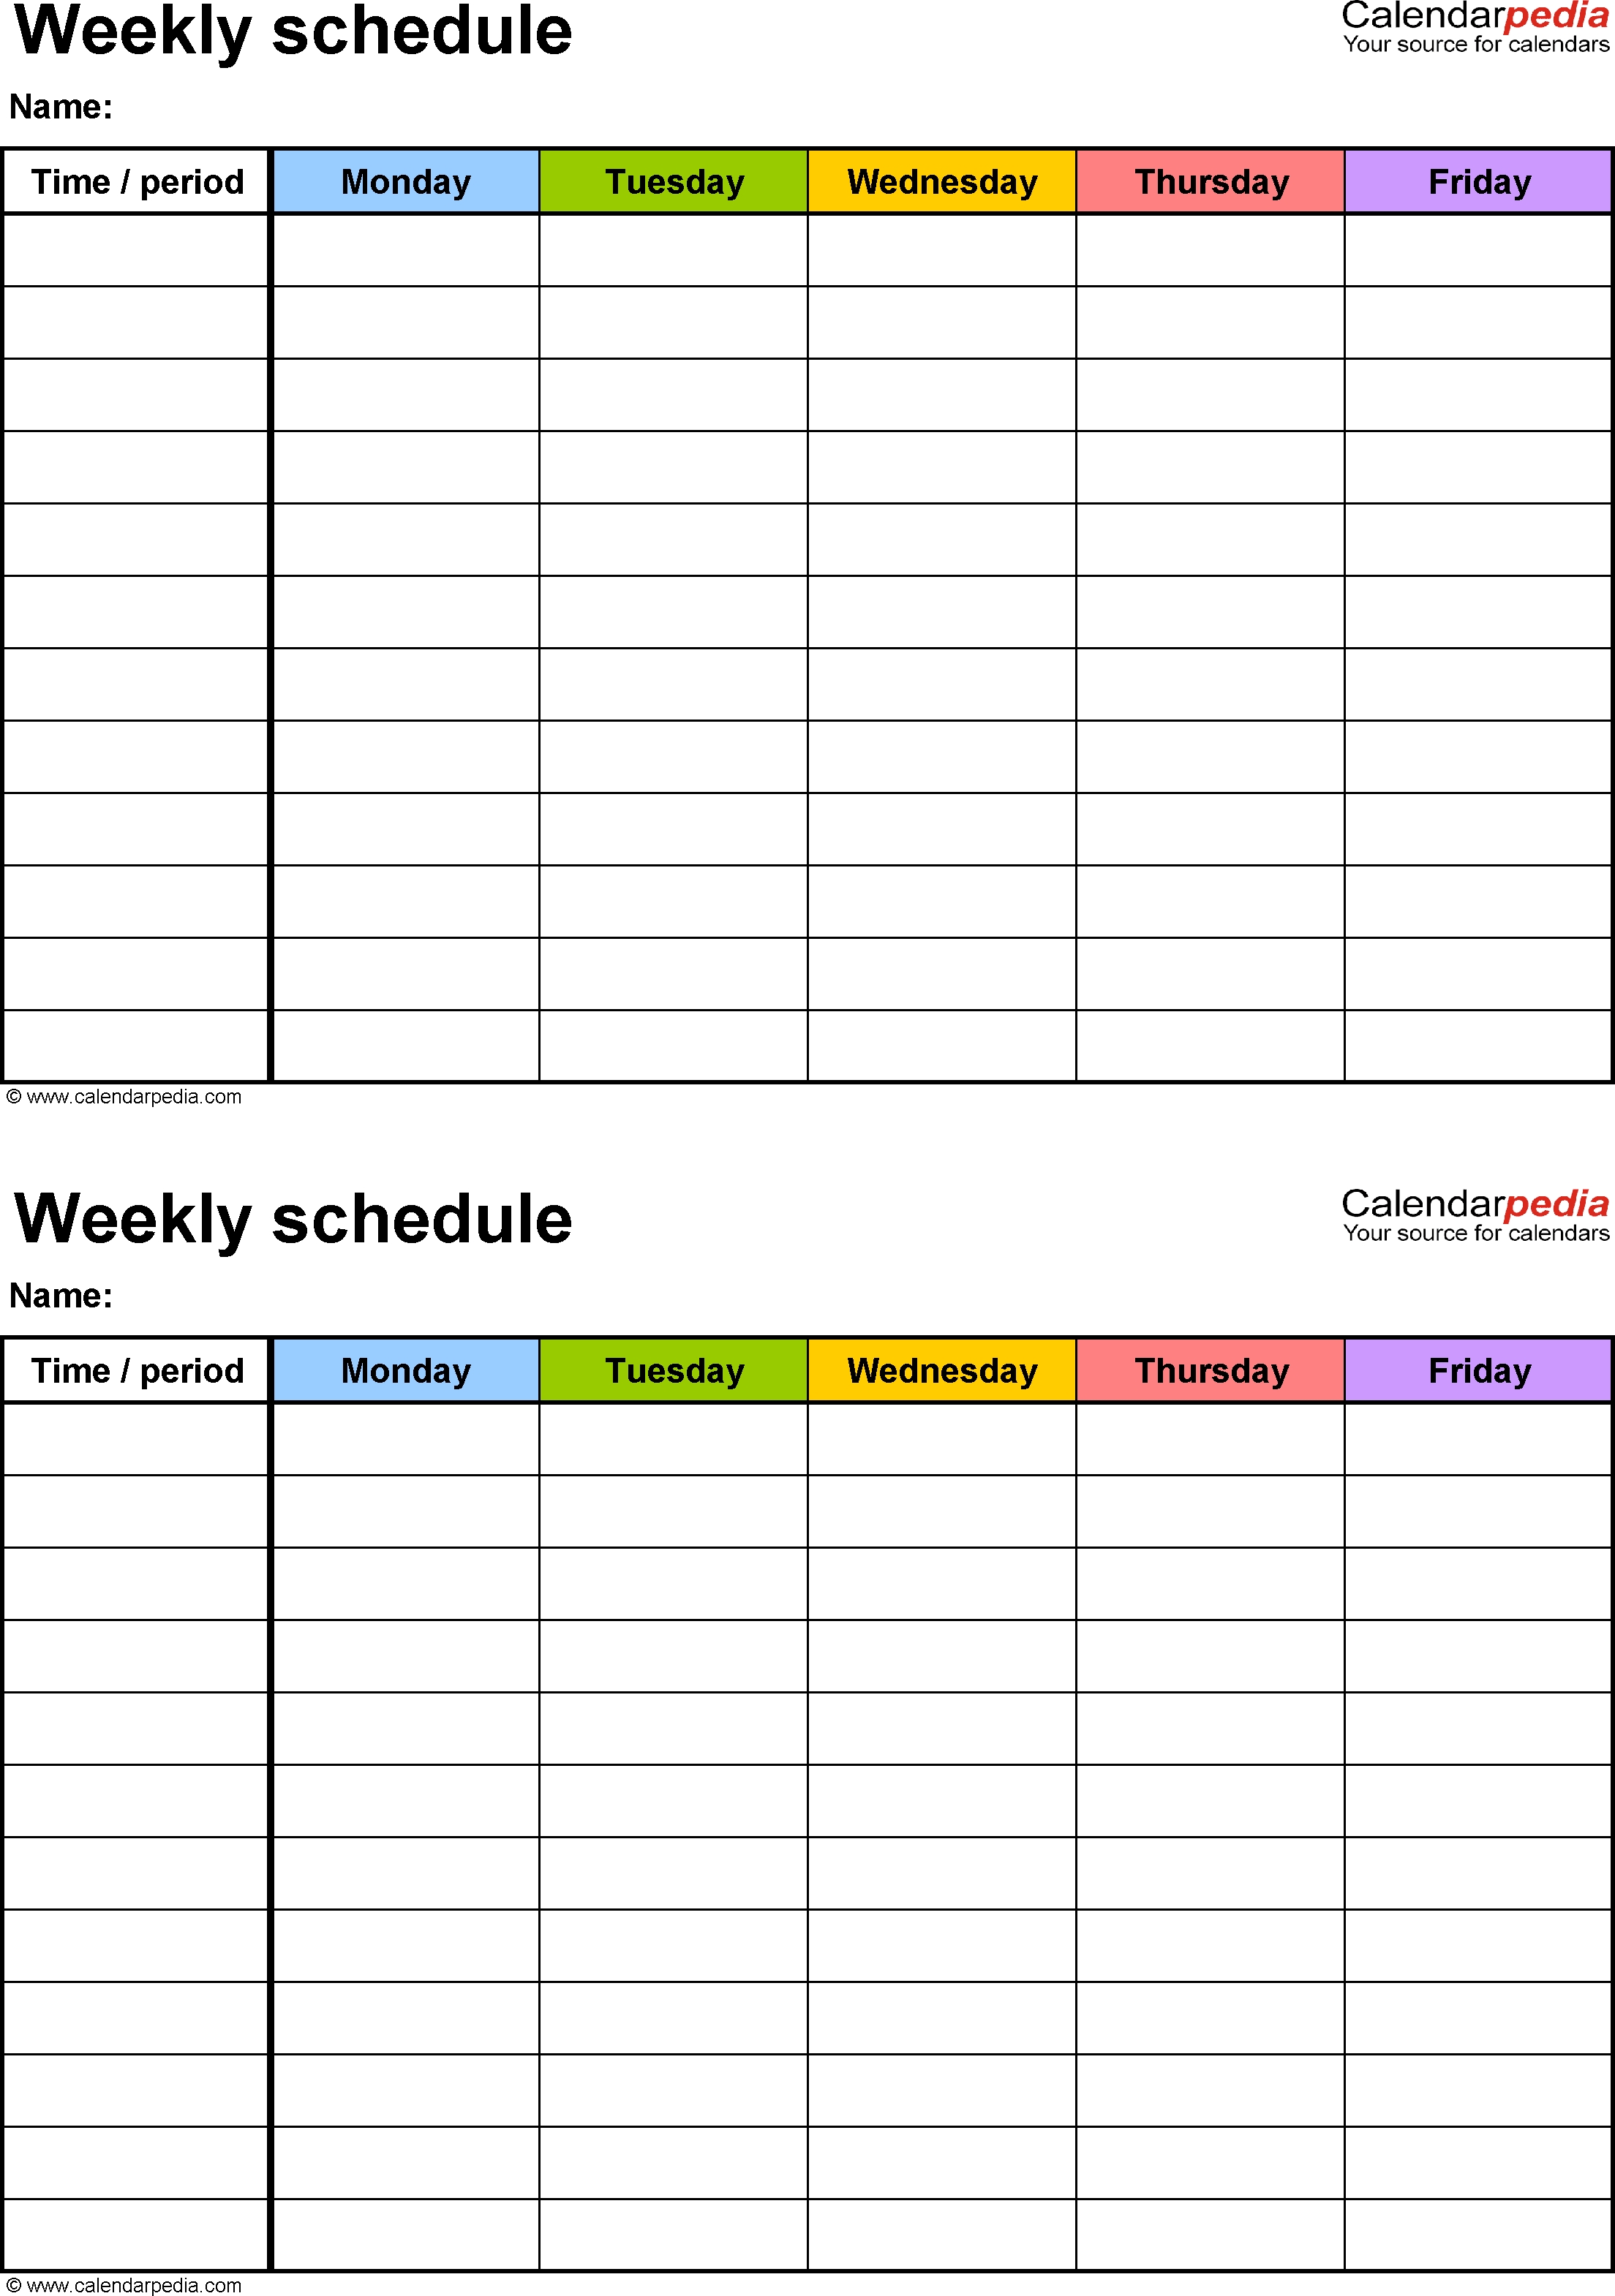 Free Weekly Schedule Templates For Excel - 18 Templates throughout 2 Week Calendar Printable Calendar